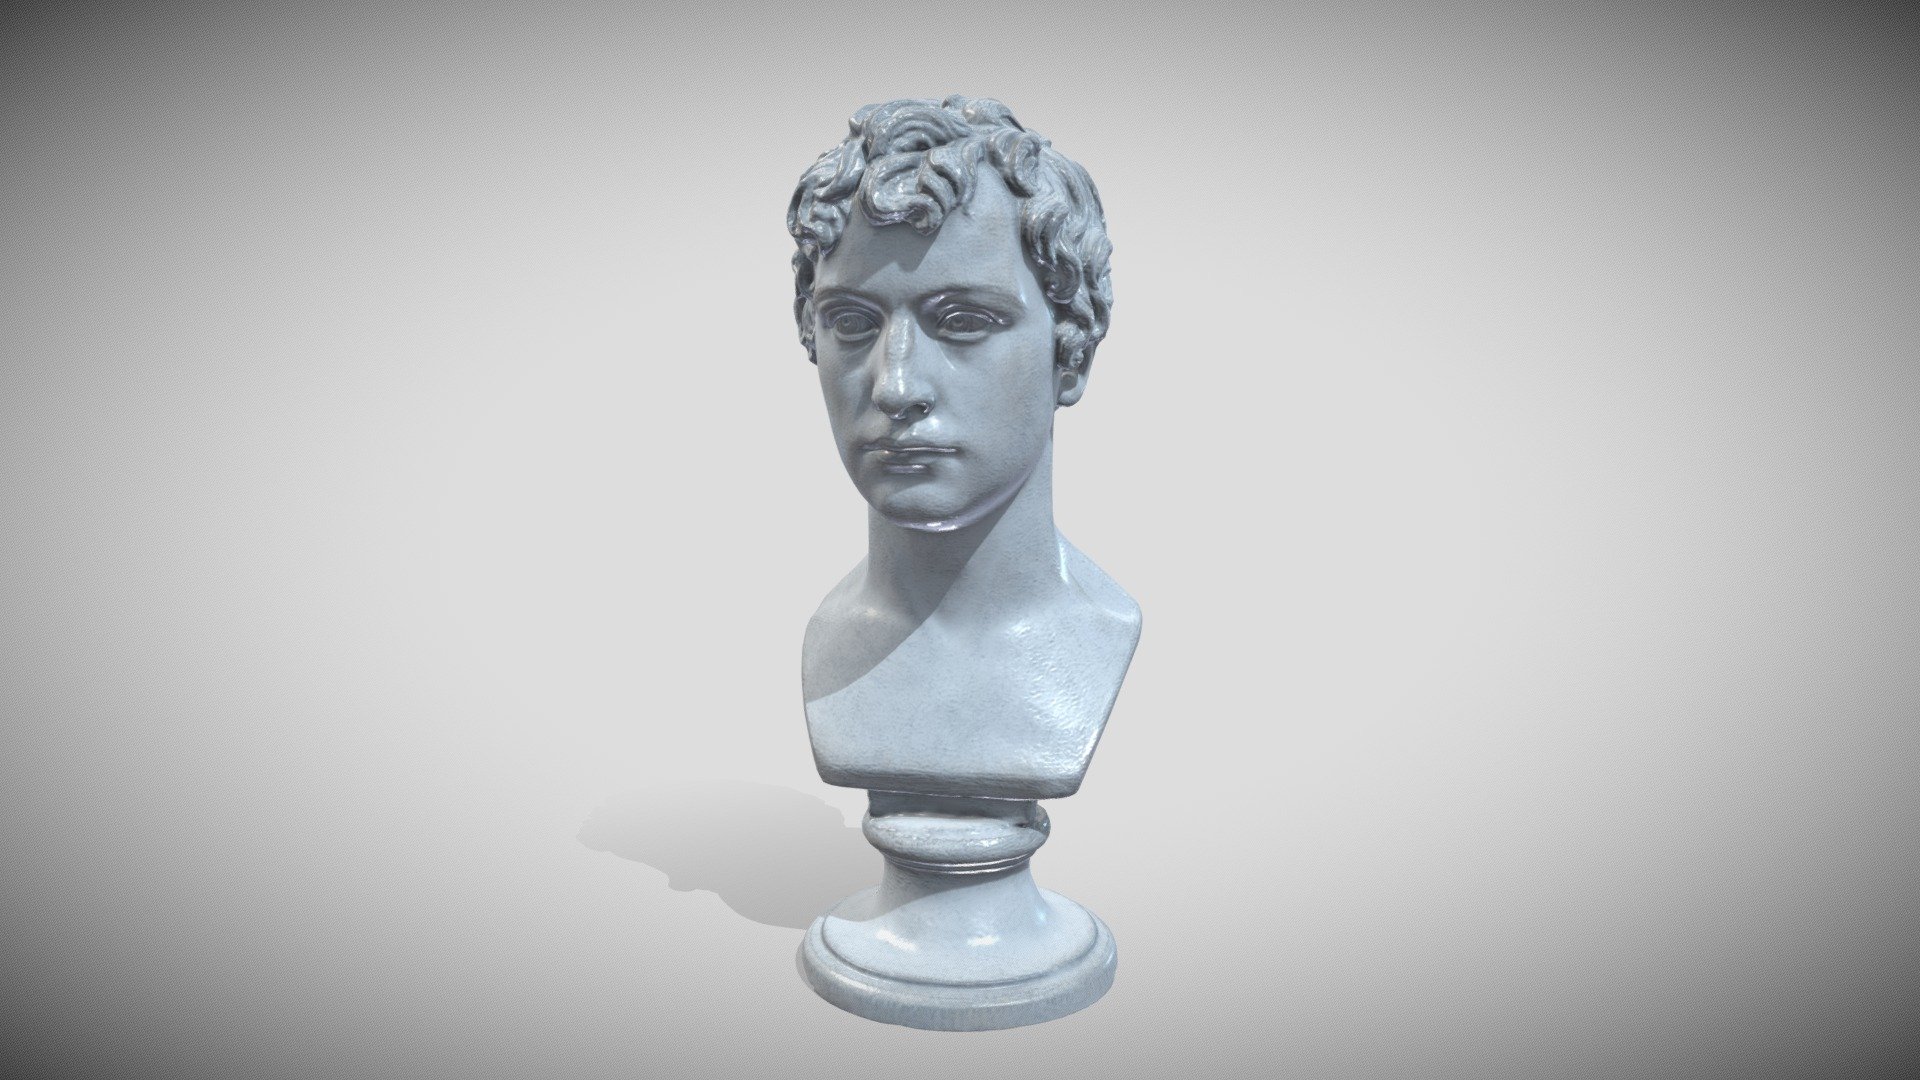 Original very nice 3D Scan from the Thorvaldsens Museum

https://thorvaldsensmuseum.dk/en/collections/work/A241

here the Painted Gaming Version LR... 3d model